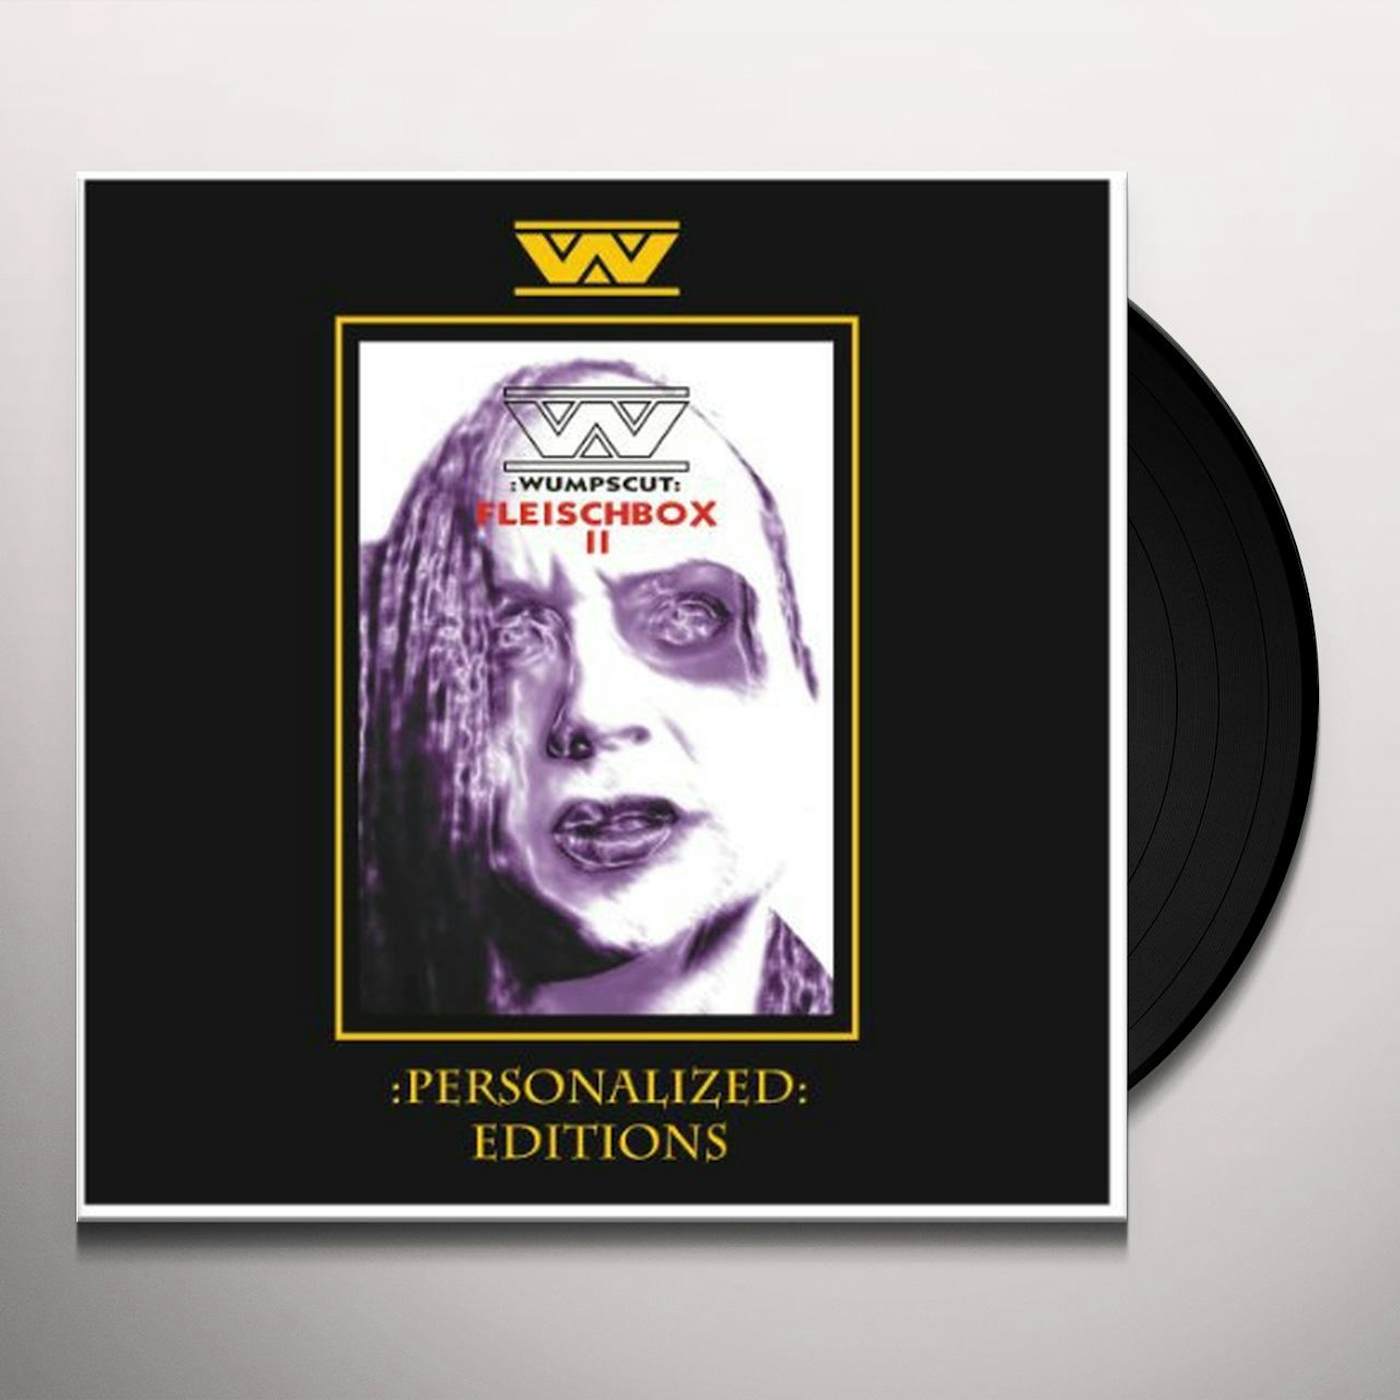 :Wumpscut: BOESES JUNGES FLEISCH II PERSONALIZED EDITIONS (14 Vinyl Record